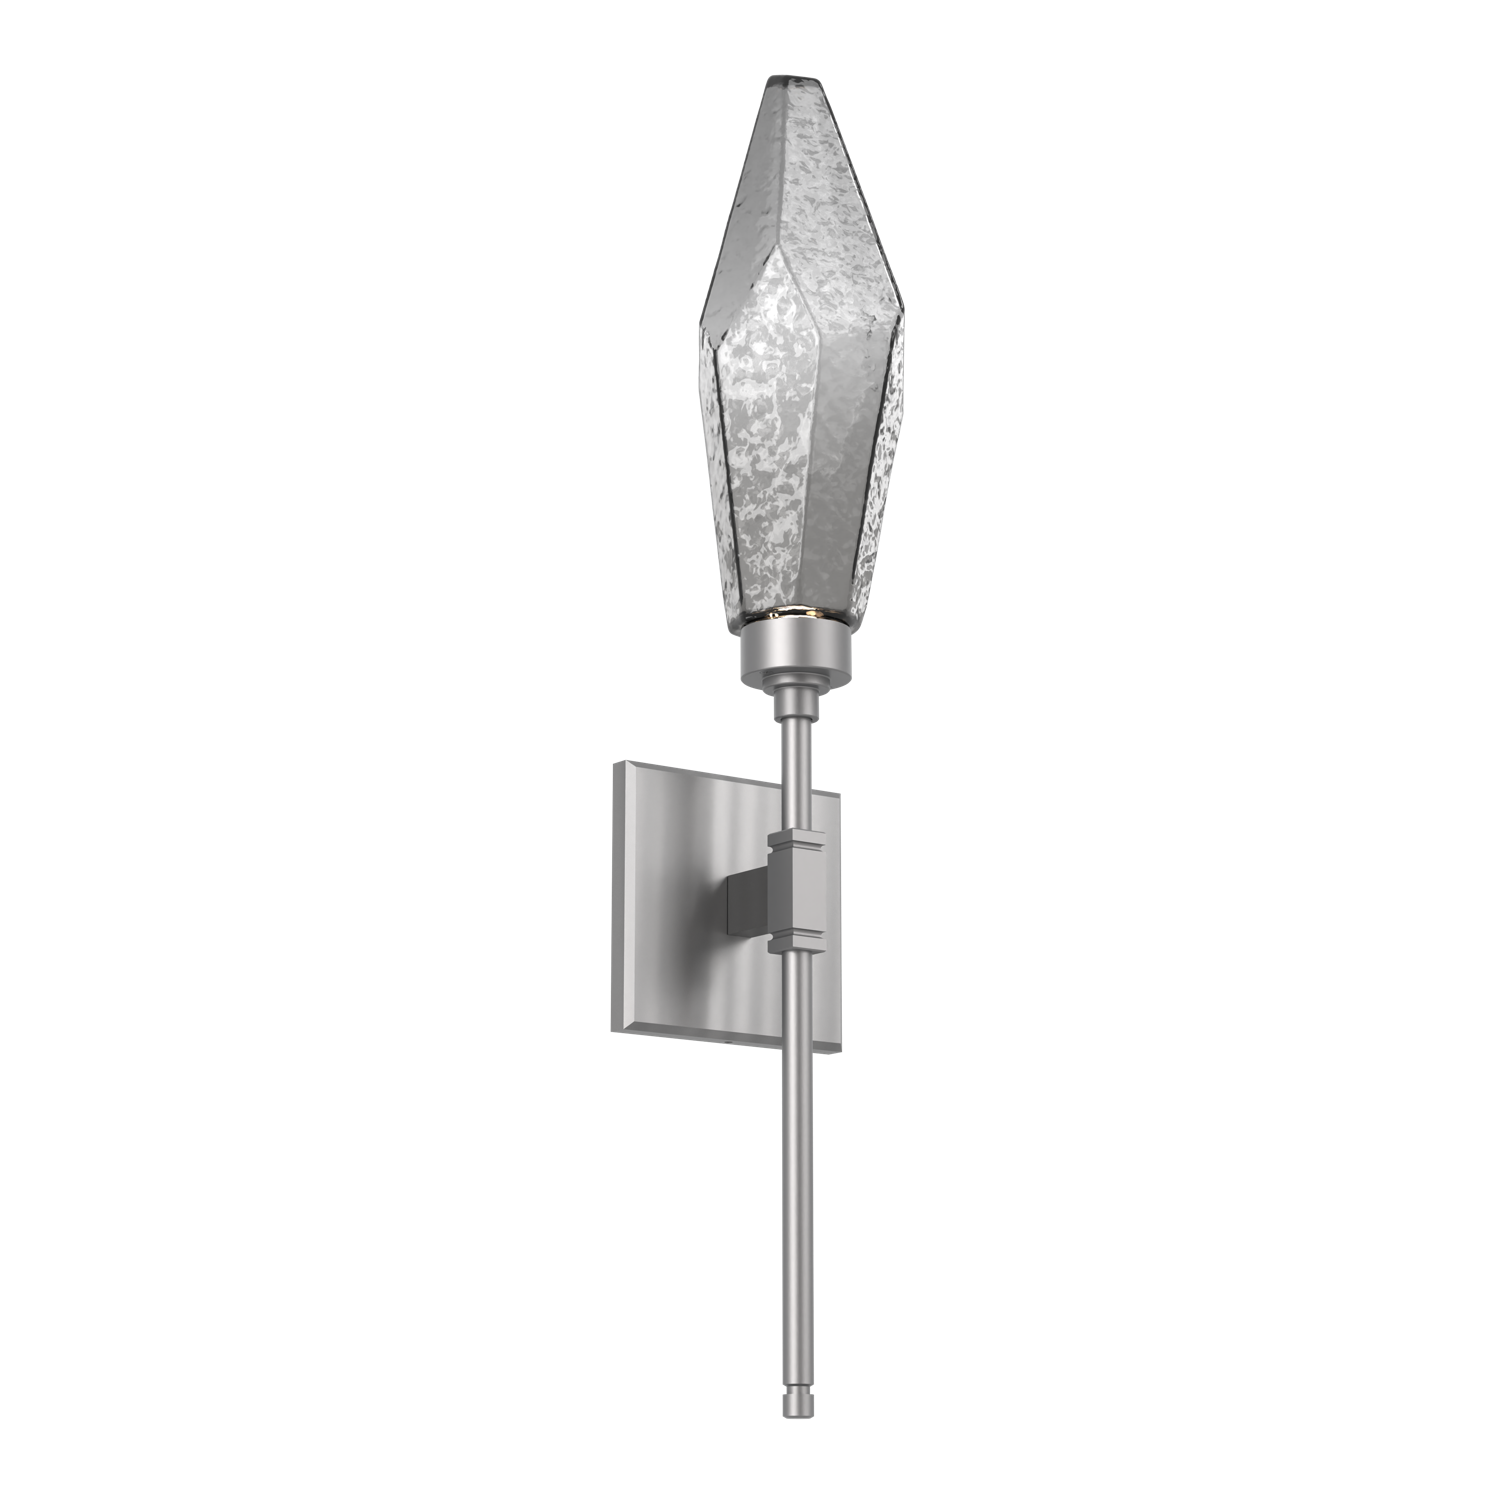 IDB0050-04-SN-CS-Hammerton-Studio-Rock-Crystal-ada-certified-belvedere-wall-sconce-with-satin-nickel-finish-and-chilled-smoke-glass-shades-and-LED-lamping